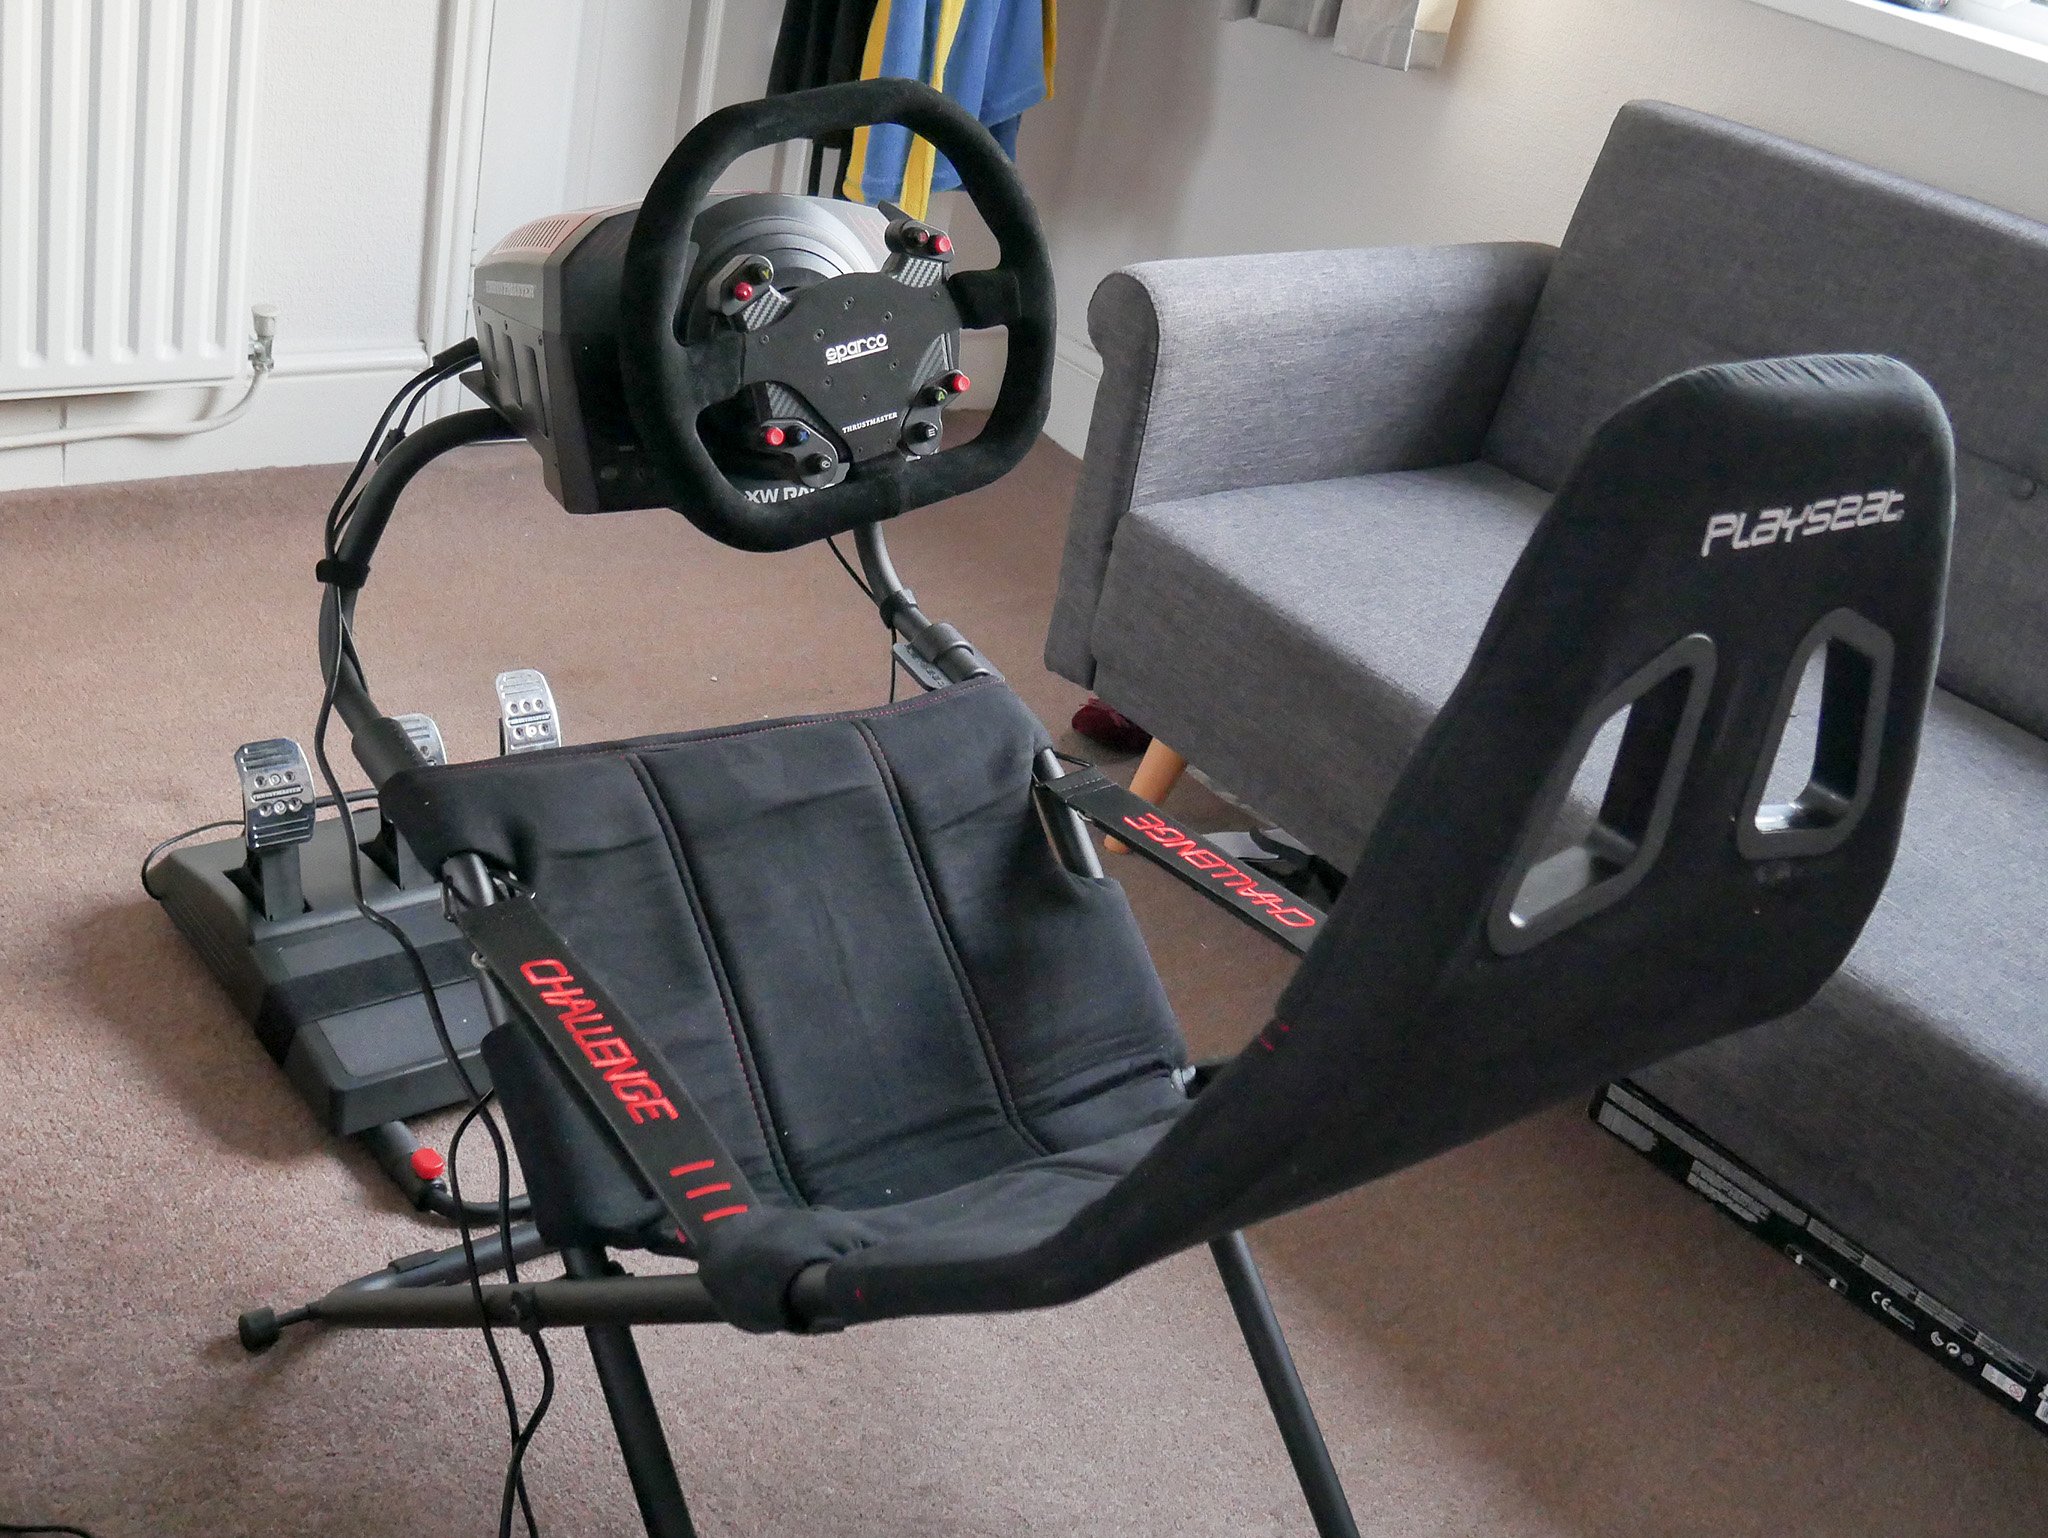 Playseat Challenge review A superb starter racing seat for gamers